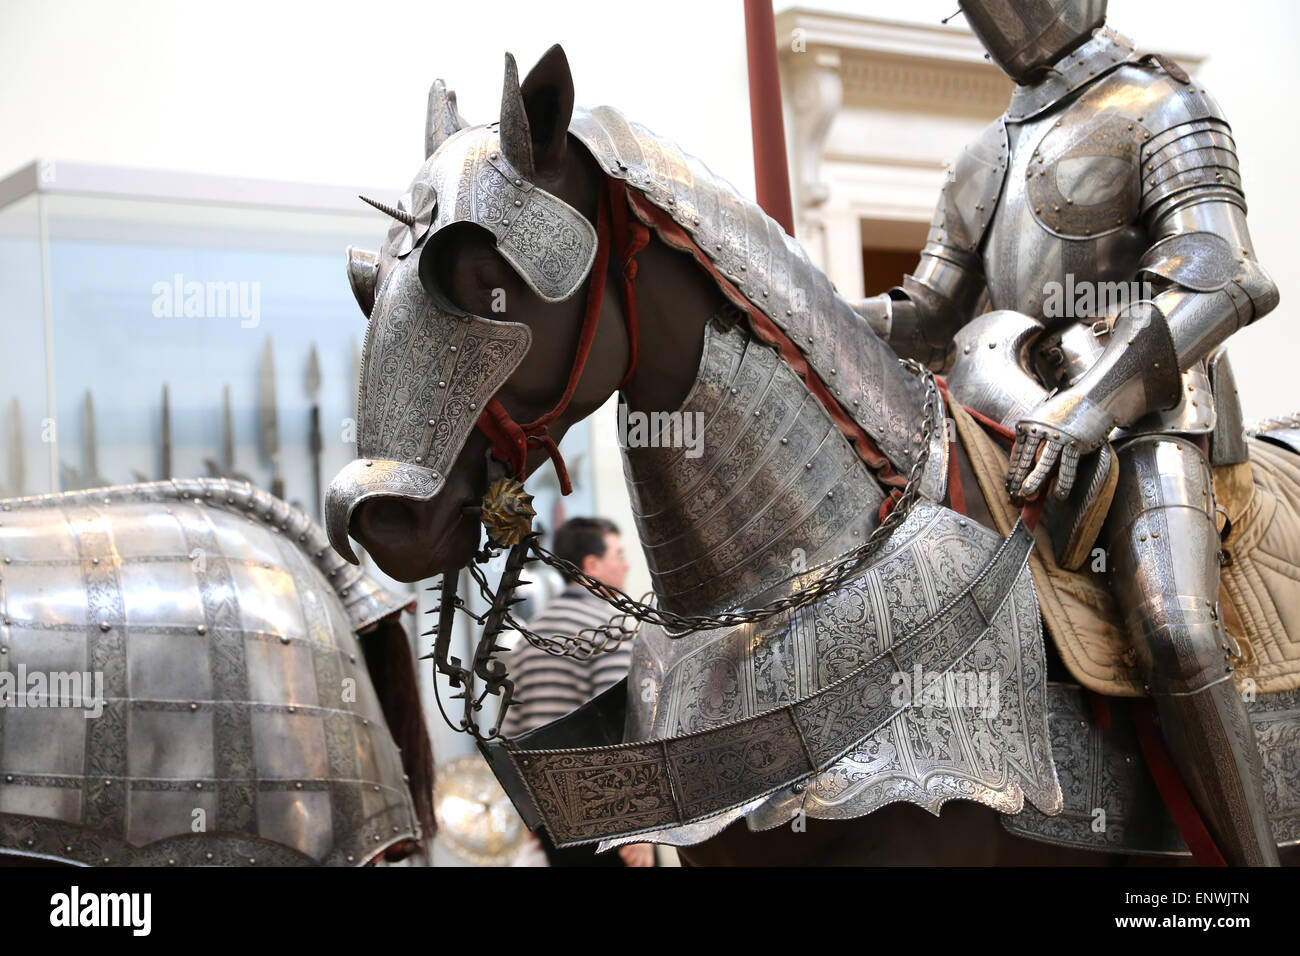 Armor for combat. Plate armour for man and horse. Europe. Metropolitan Museum of Art. New York. USA. Stock Photo